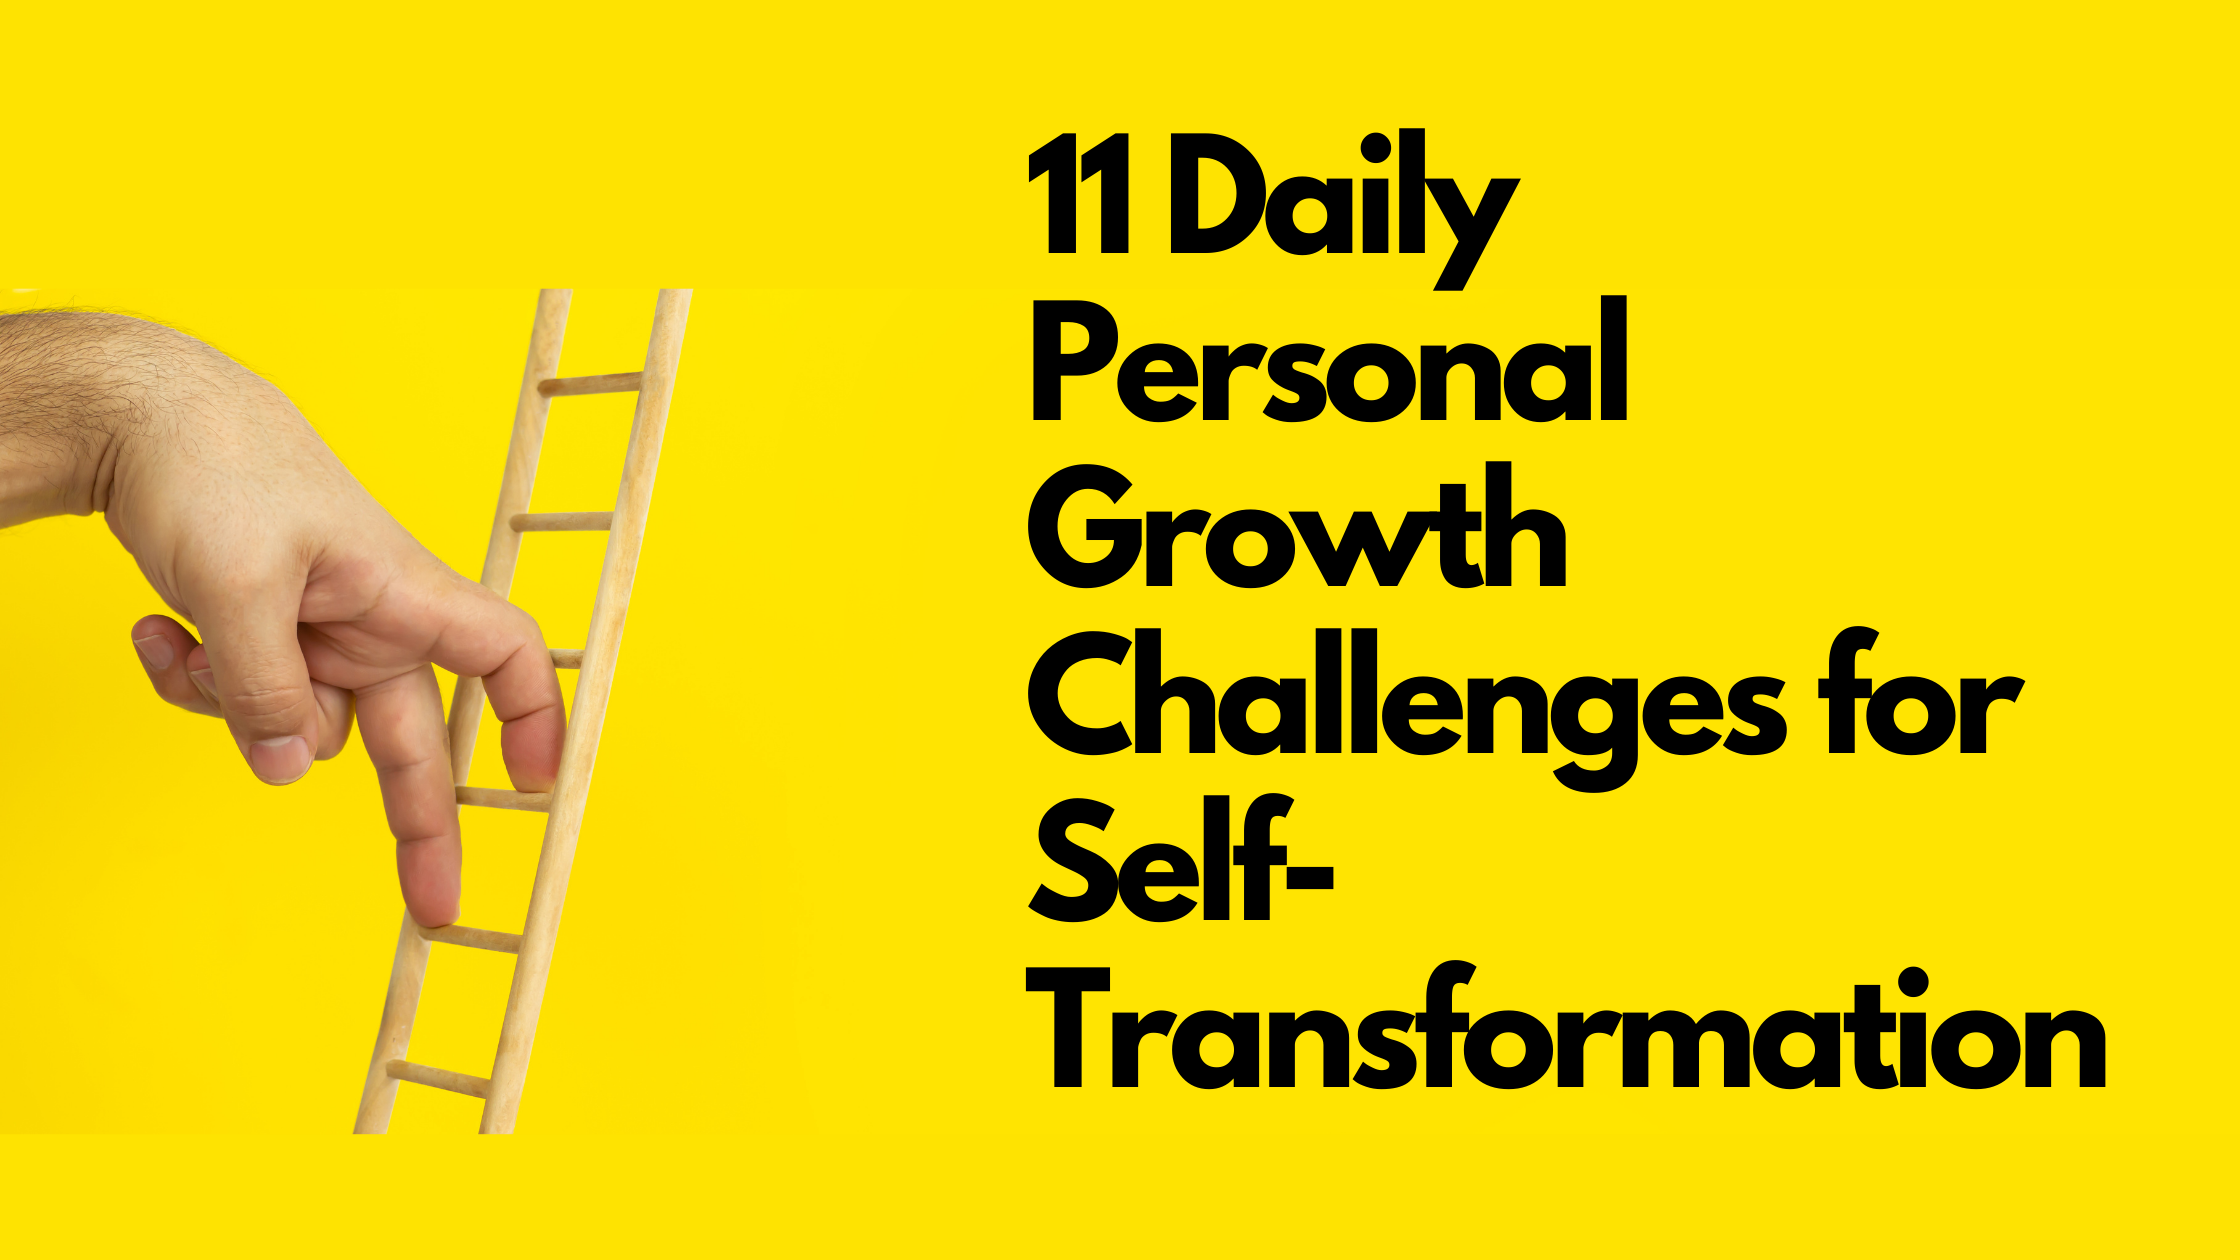 Nurturing Your Inner Fire: 11 Daily Personal Growth Challenges for Self-Transformation